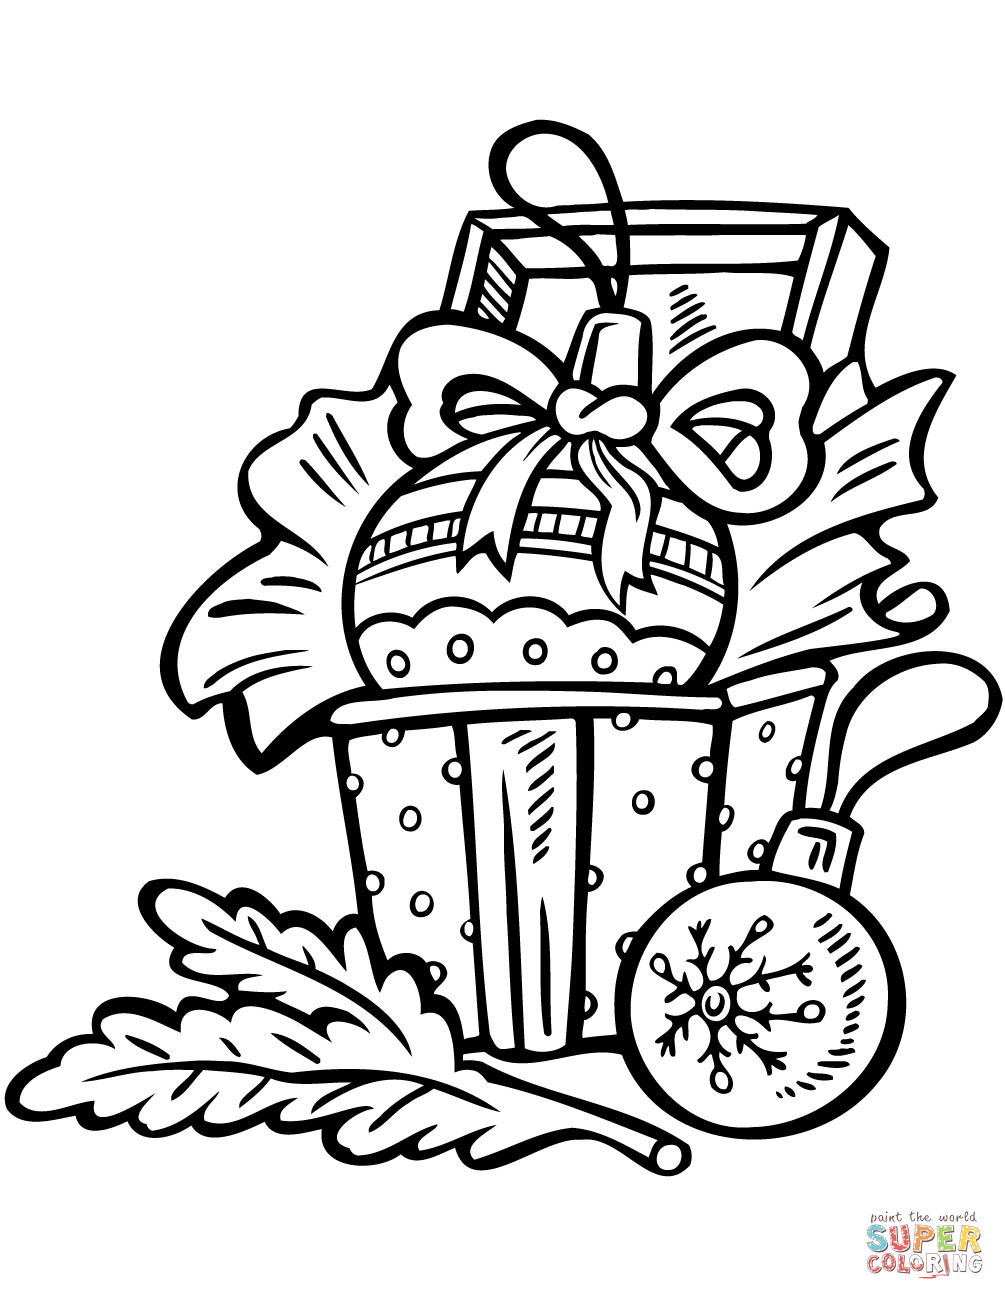 Christmas Ornaments Coloring Pages
 Christmas Ornaments coloring page